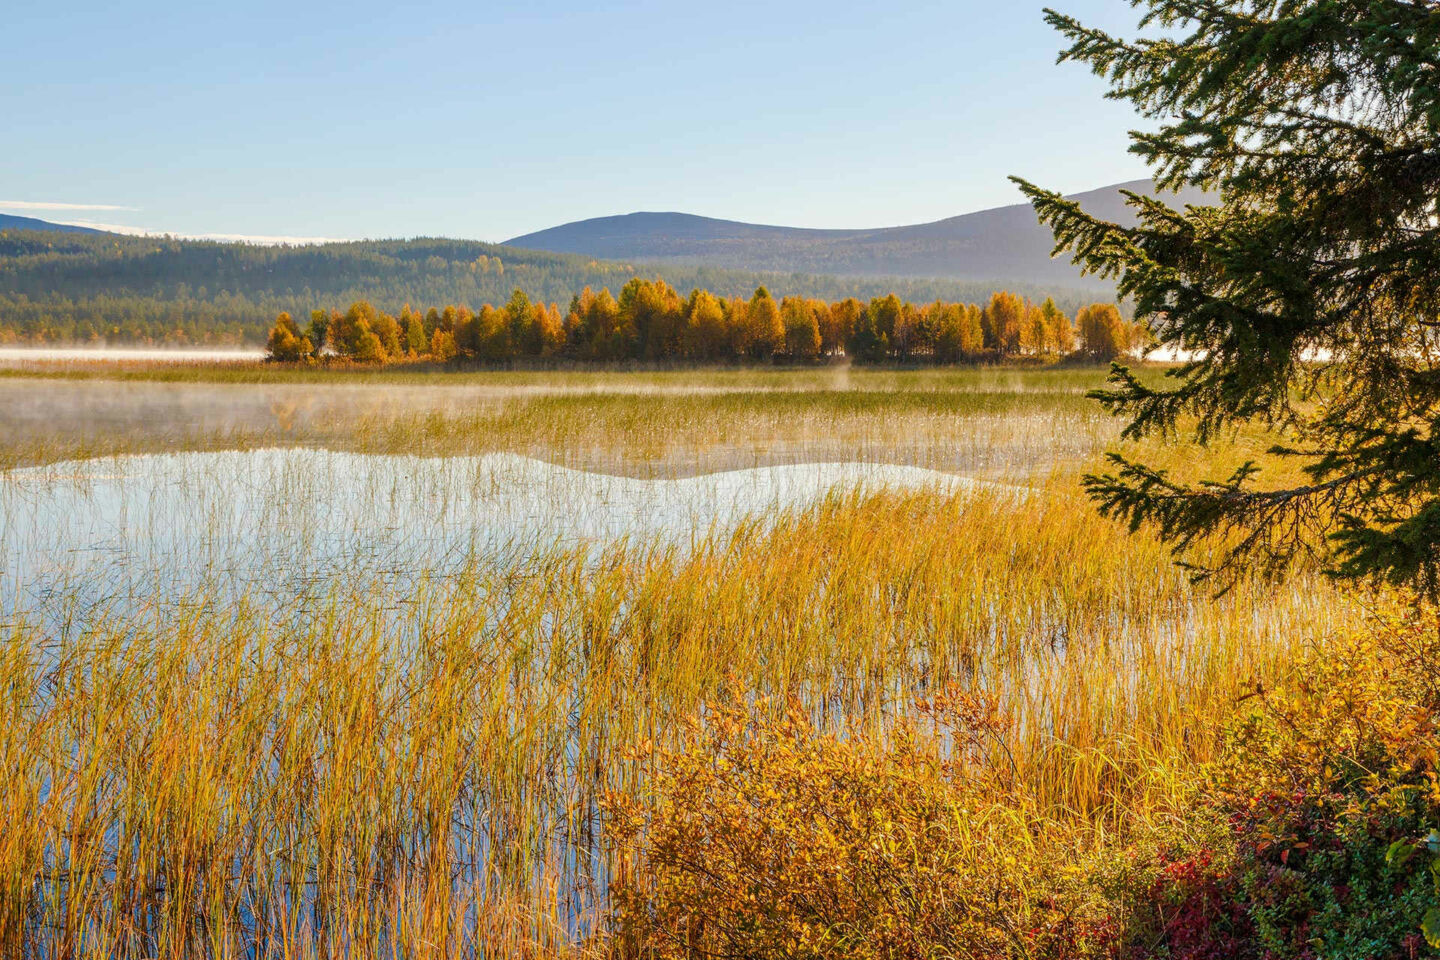 Autumn colors, a feature of filming in Finnish Lapland locations